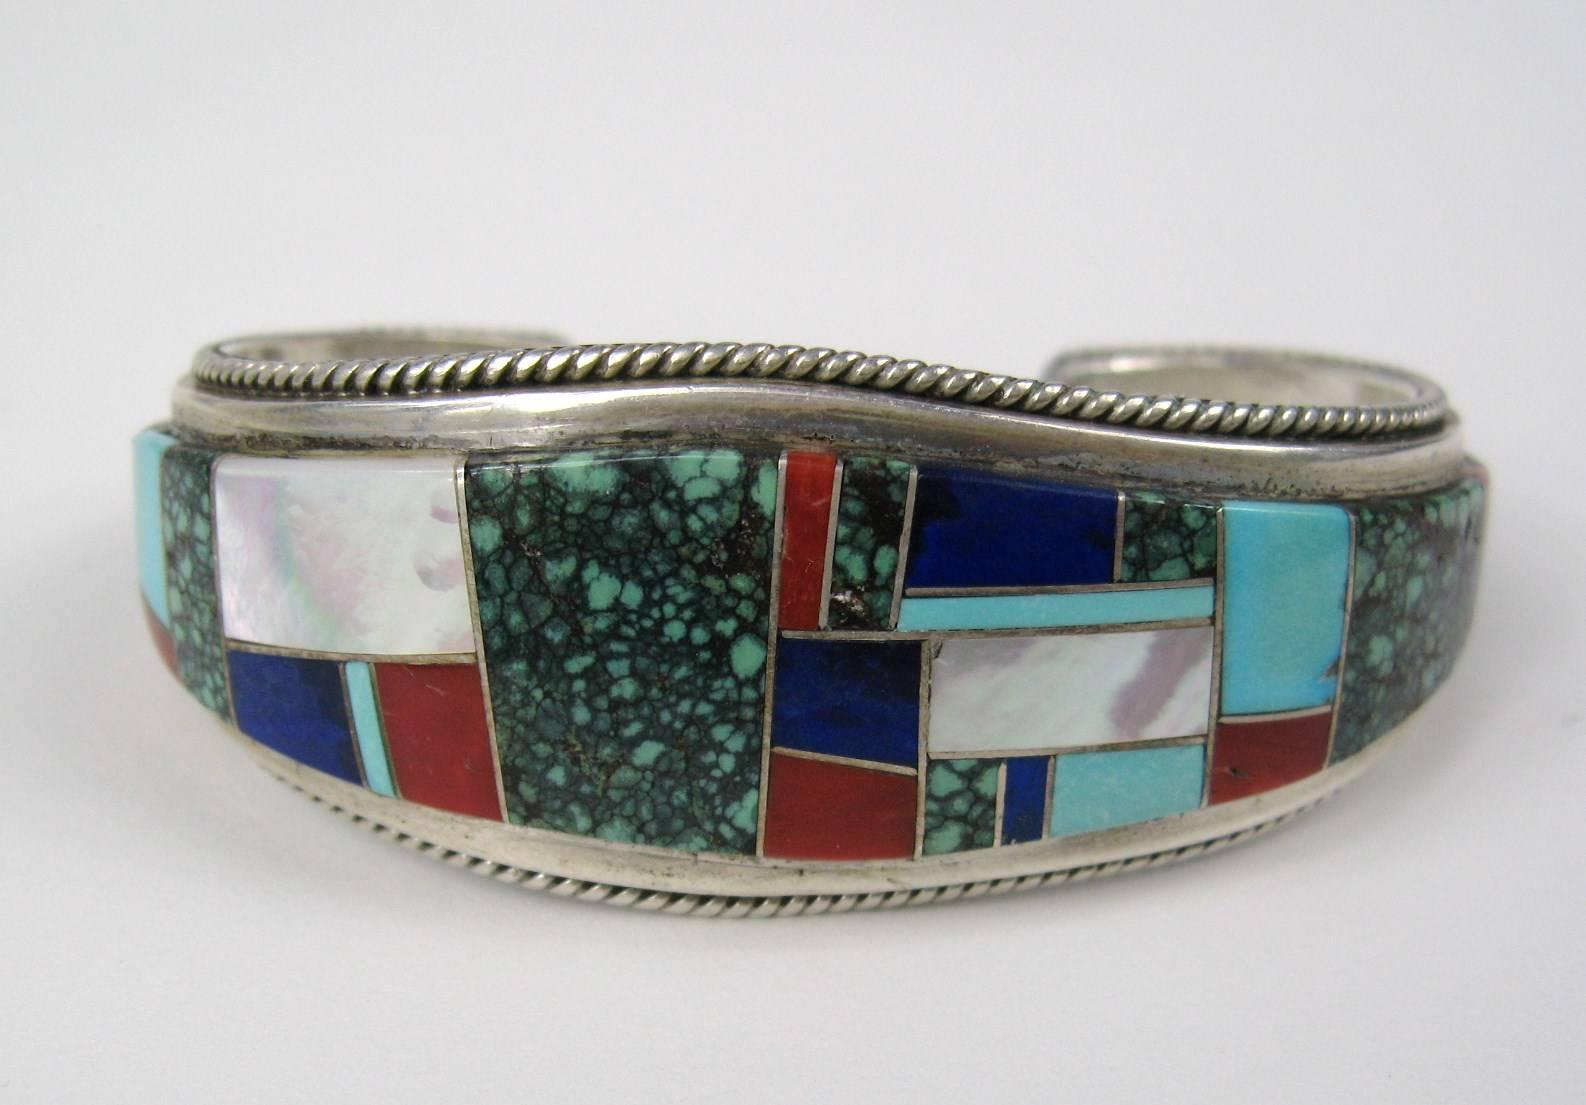 Bracelet is made up of turquoise, spiny oyster, lapis lazuli, Coral and mother-of-pearl. Exceptional quality inlay workmanship. Measuring 1.04 in wide 1.11 in opening. Will fit a 6.5- 7.5 in wrist has a bit of give.  This is out of a massive